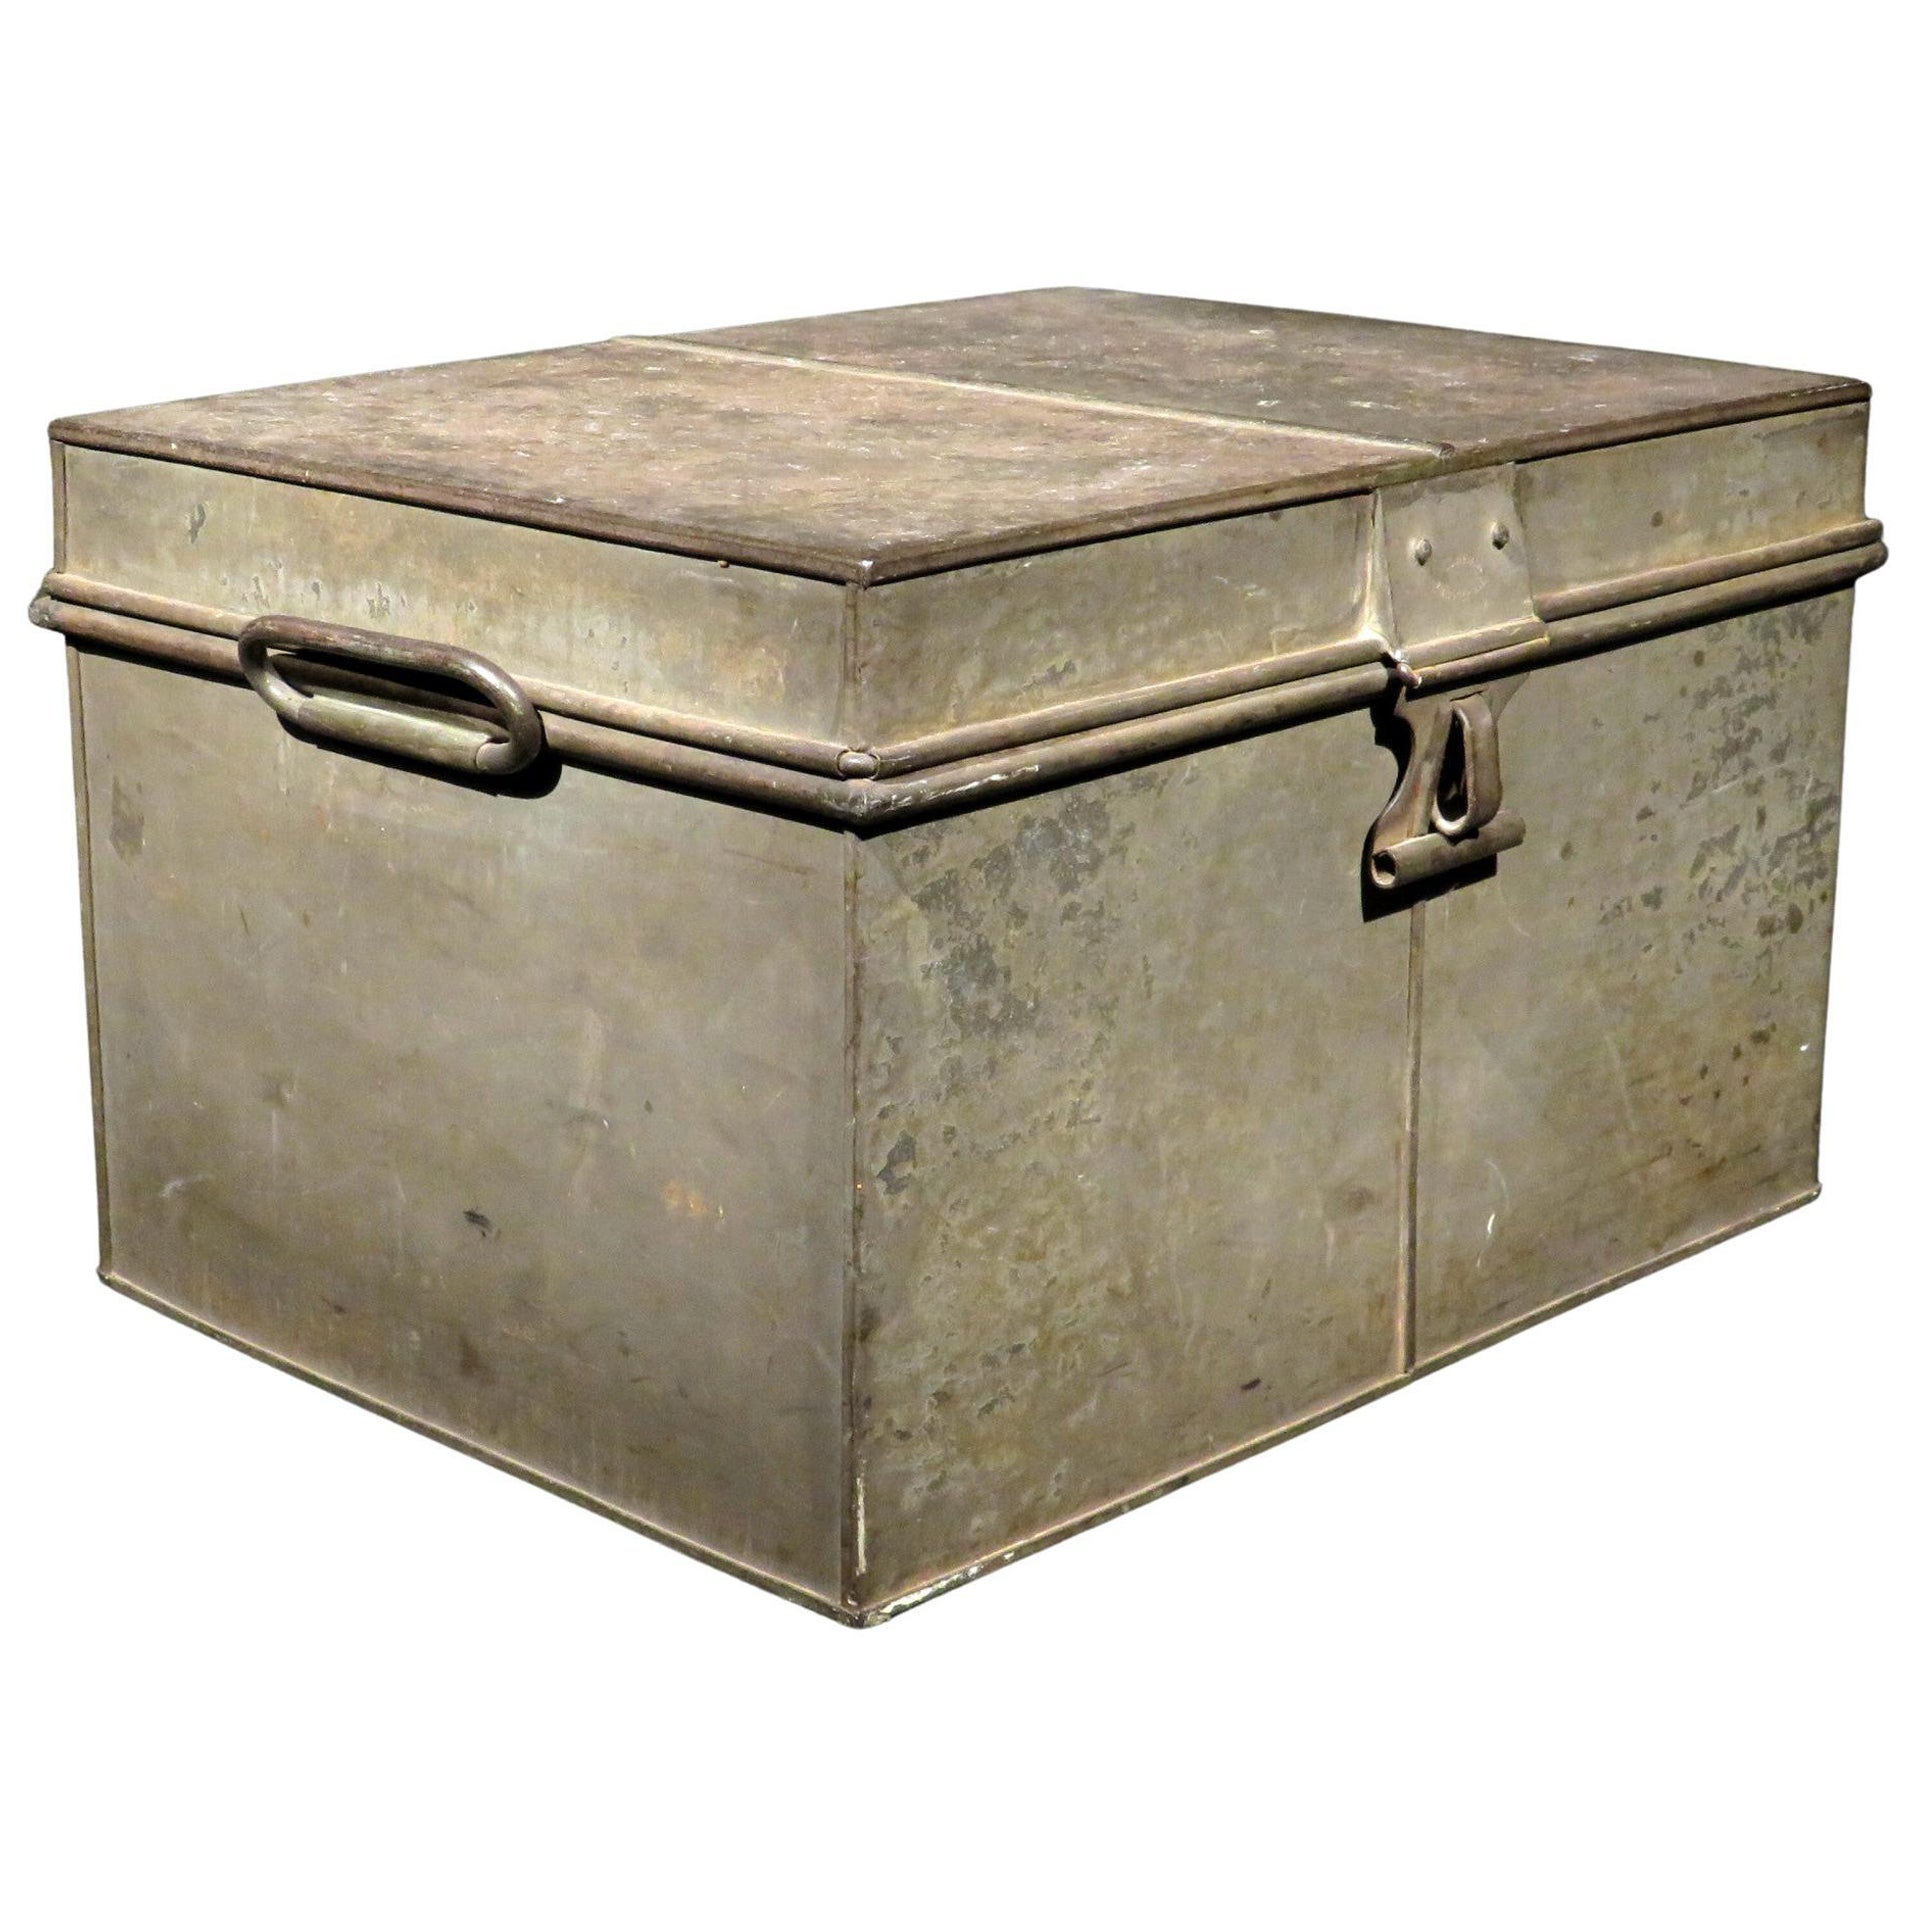 Authentic 19th Century Thomas Milner Patented Iron Safety Box, UK Circa 1840 For Sale